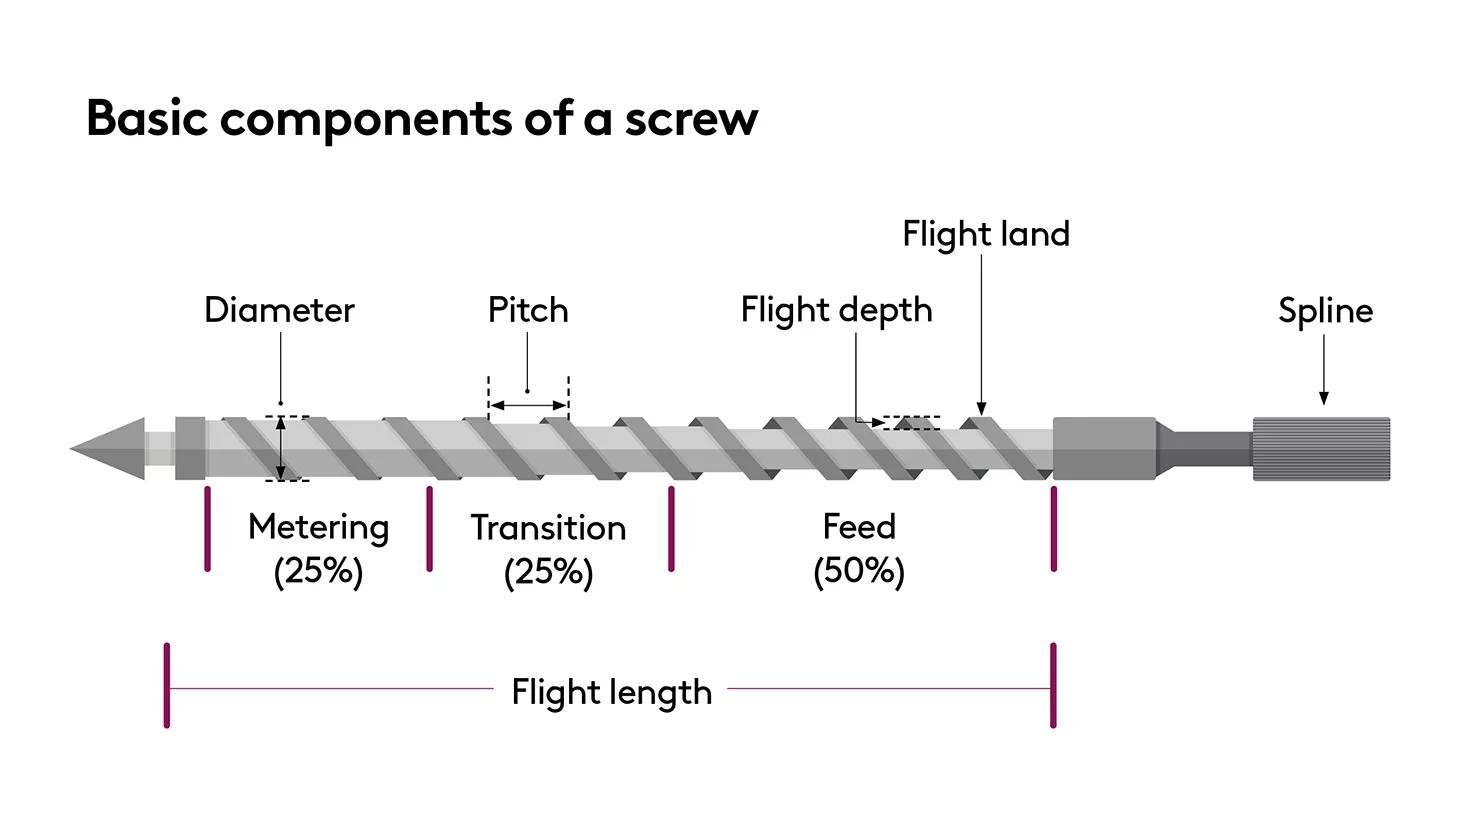 Basic components of a screw